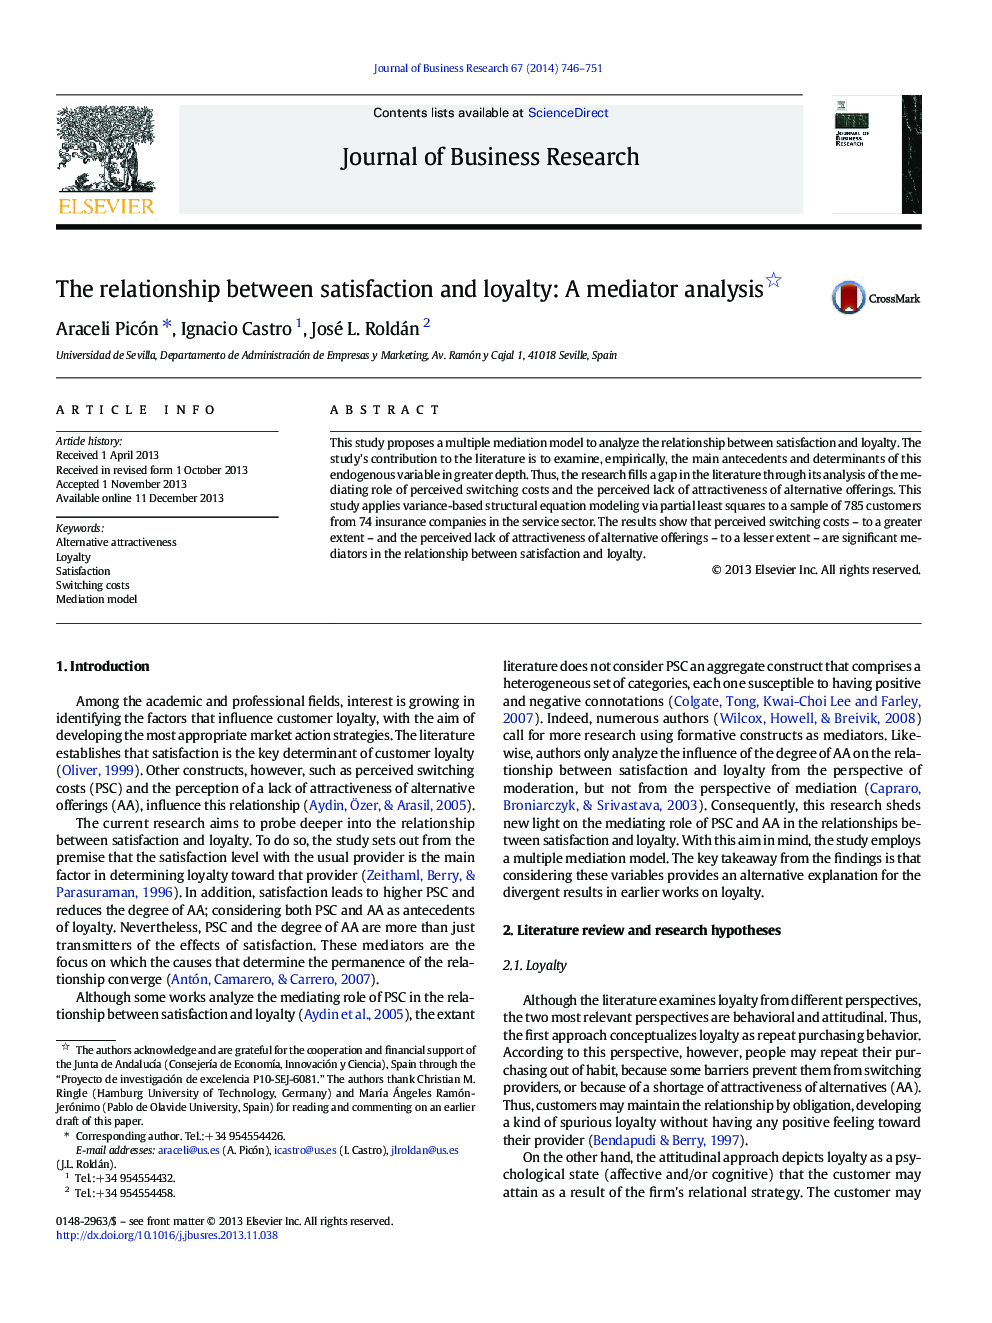 The relationship between satisfaction and loyalty: A mediator analysis 